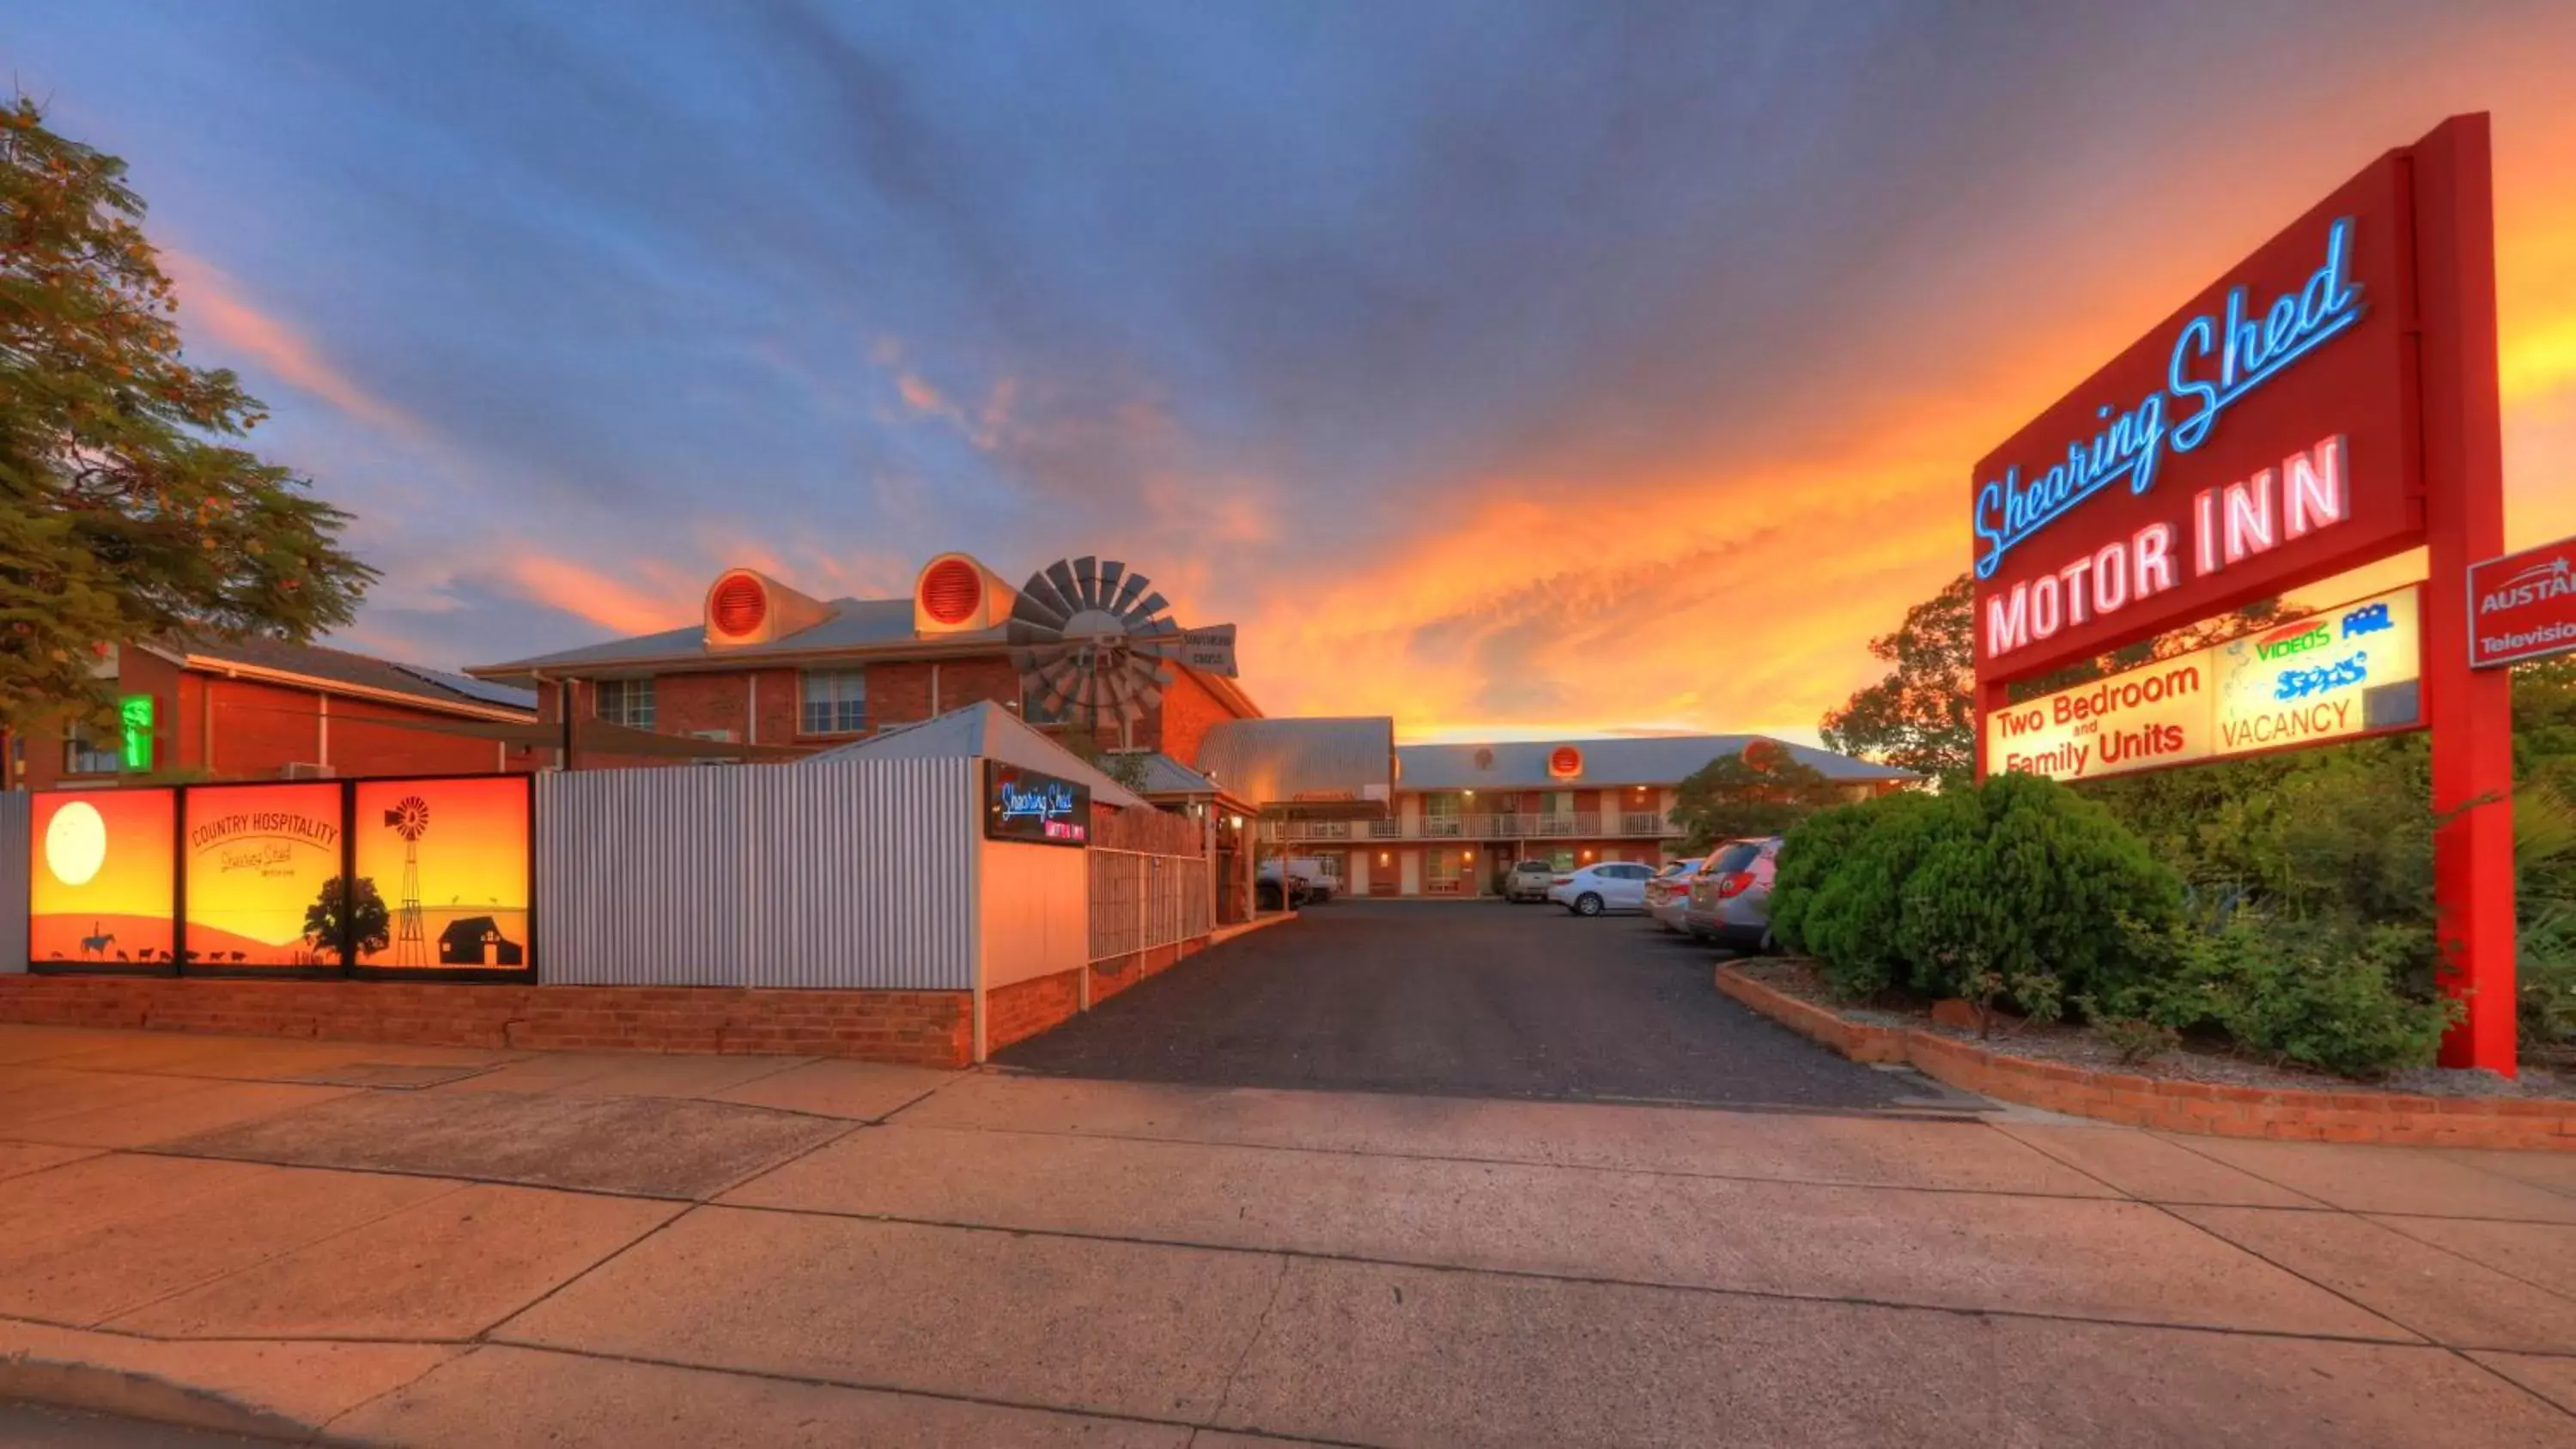 Street view, Property Building in Shearing Shed Motor Inn